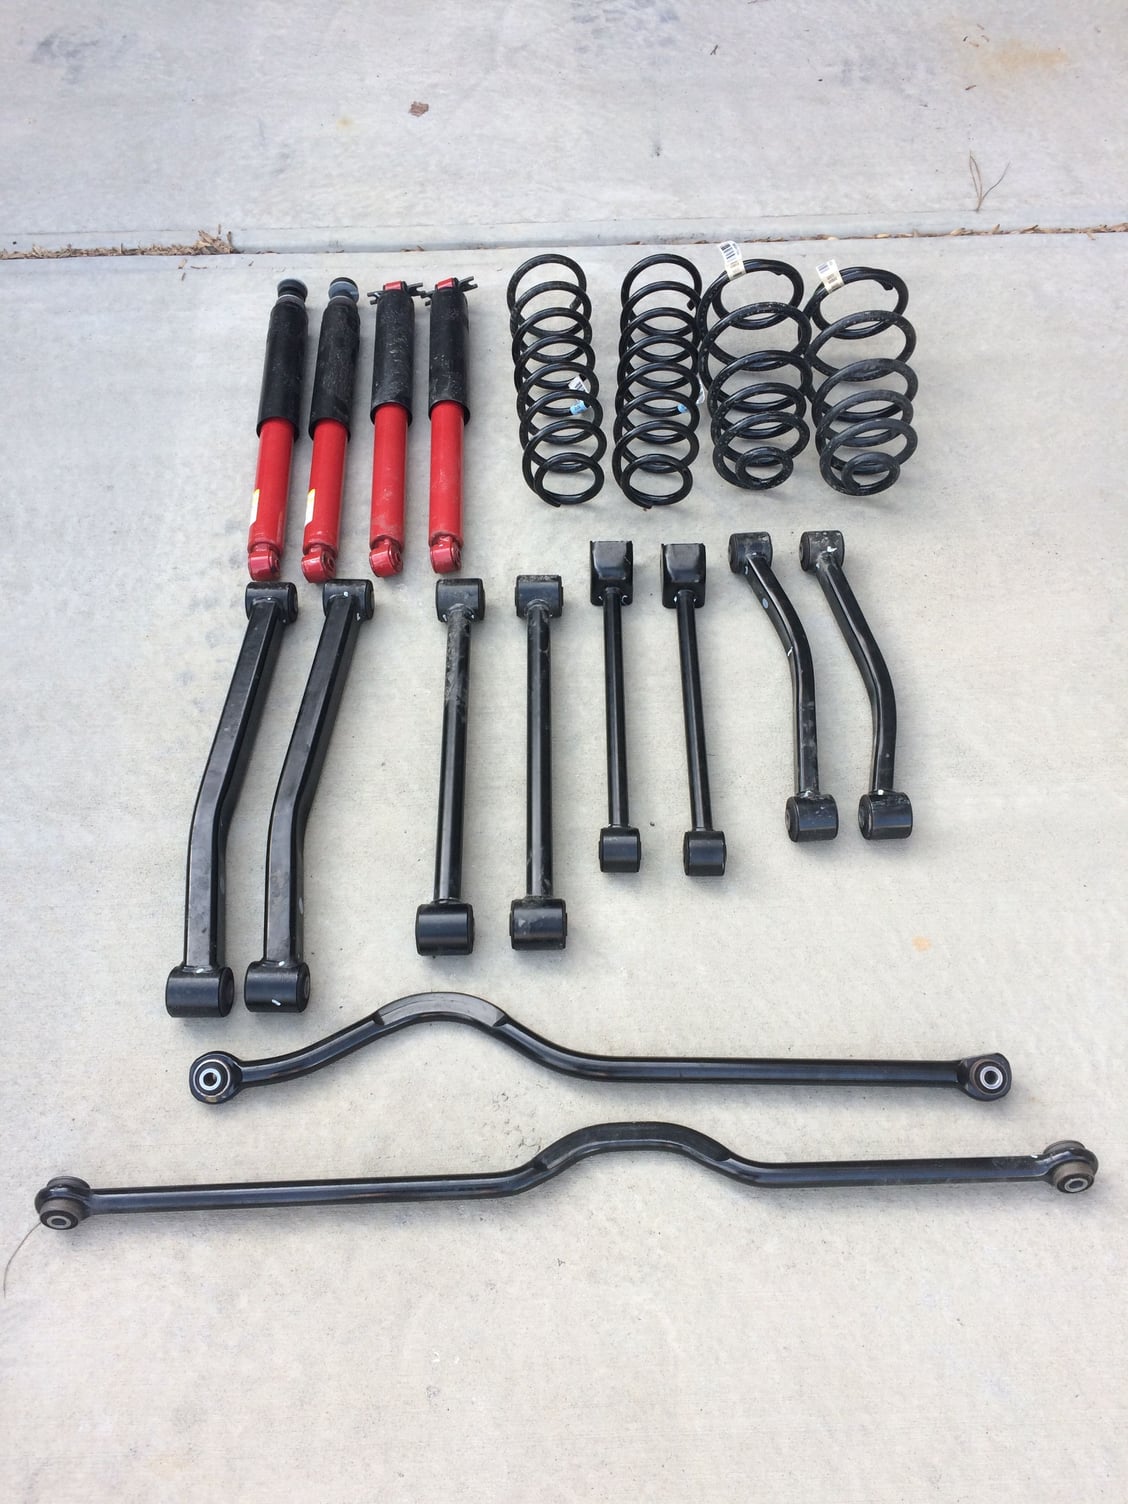 Steering/Suspension - JKU Rubicon Suspension with 300 miles - New - 2007 to 2018 Jeep Wrangler - Charlotte, NC 28262, United States